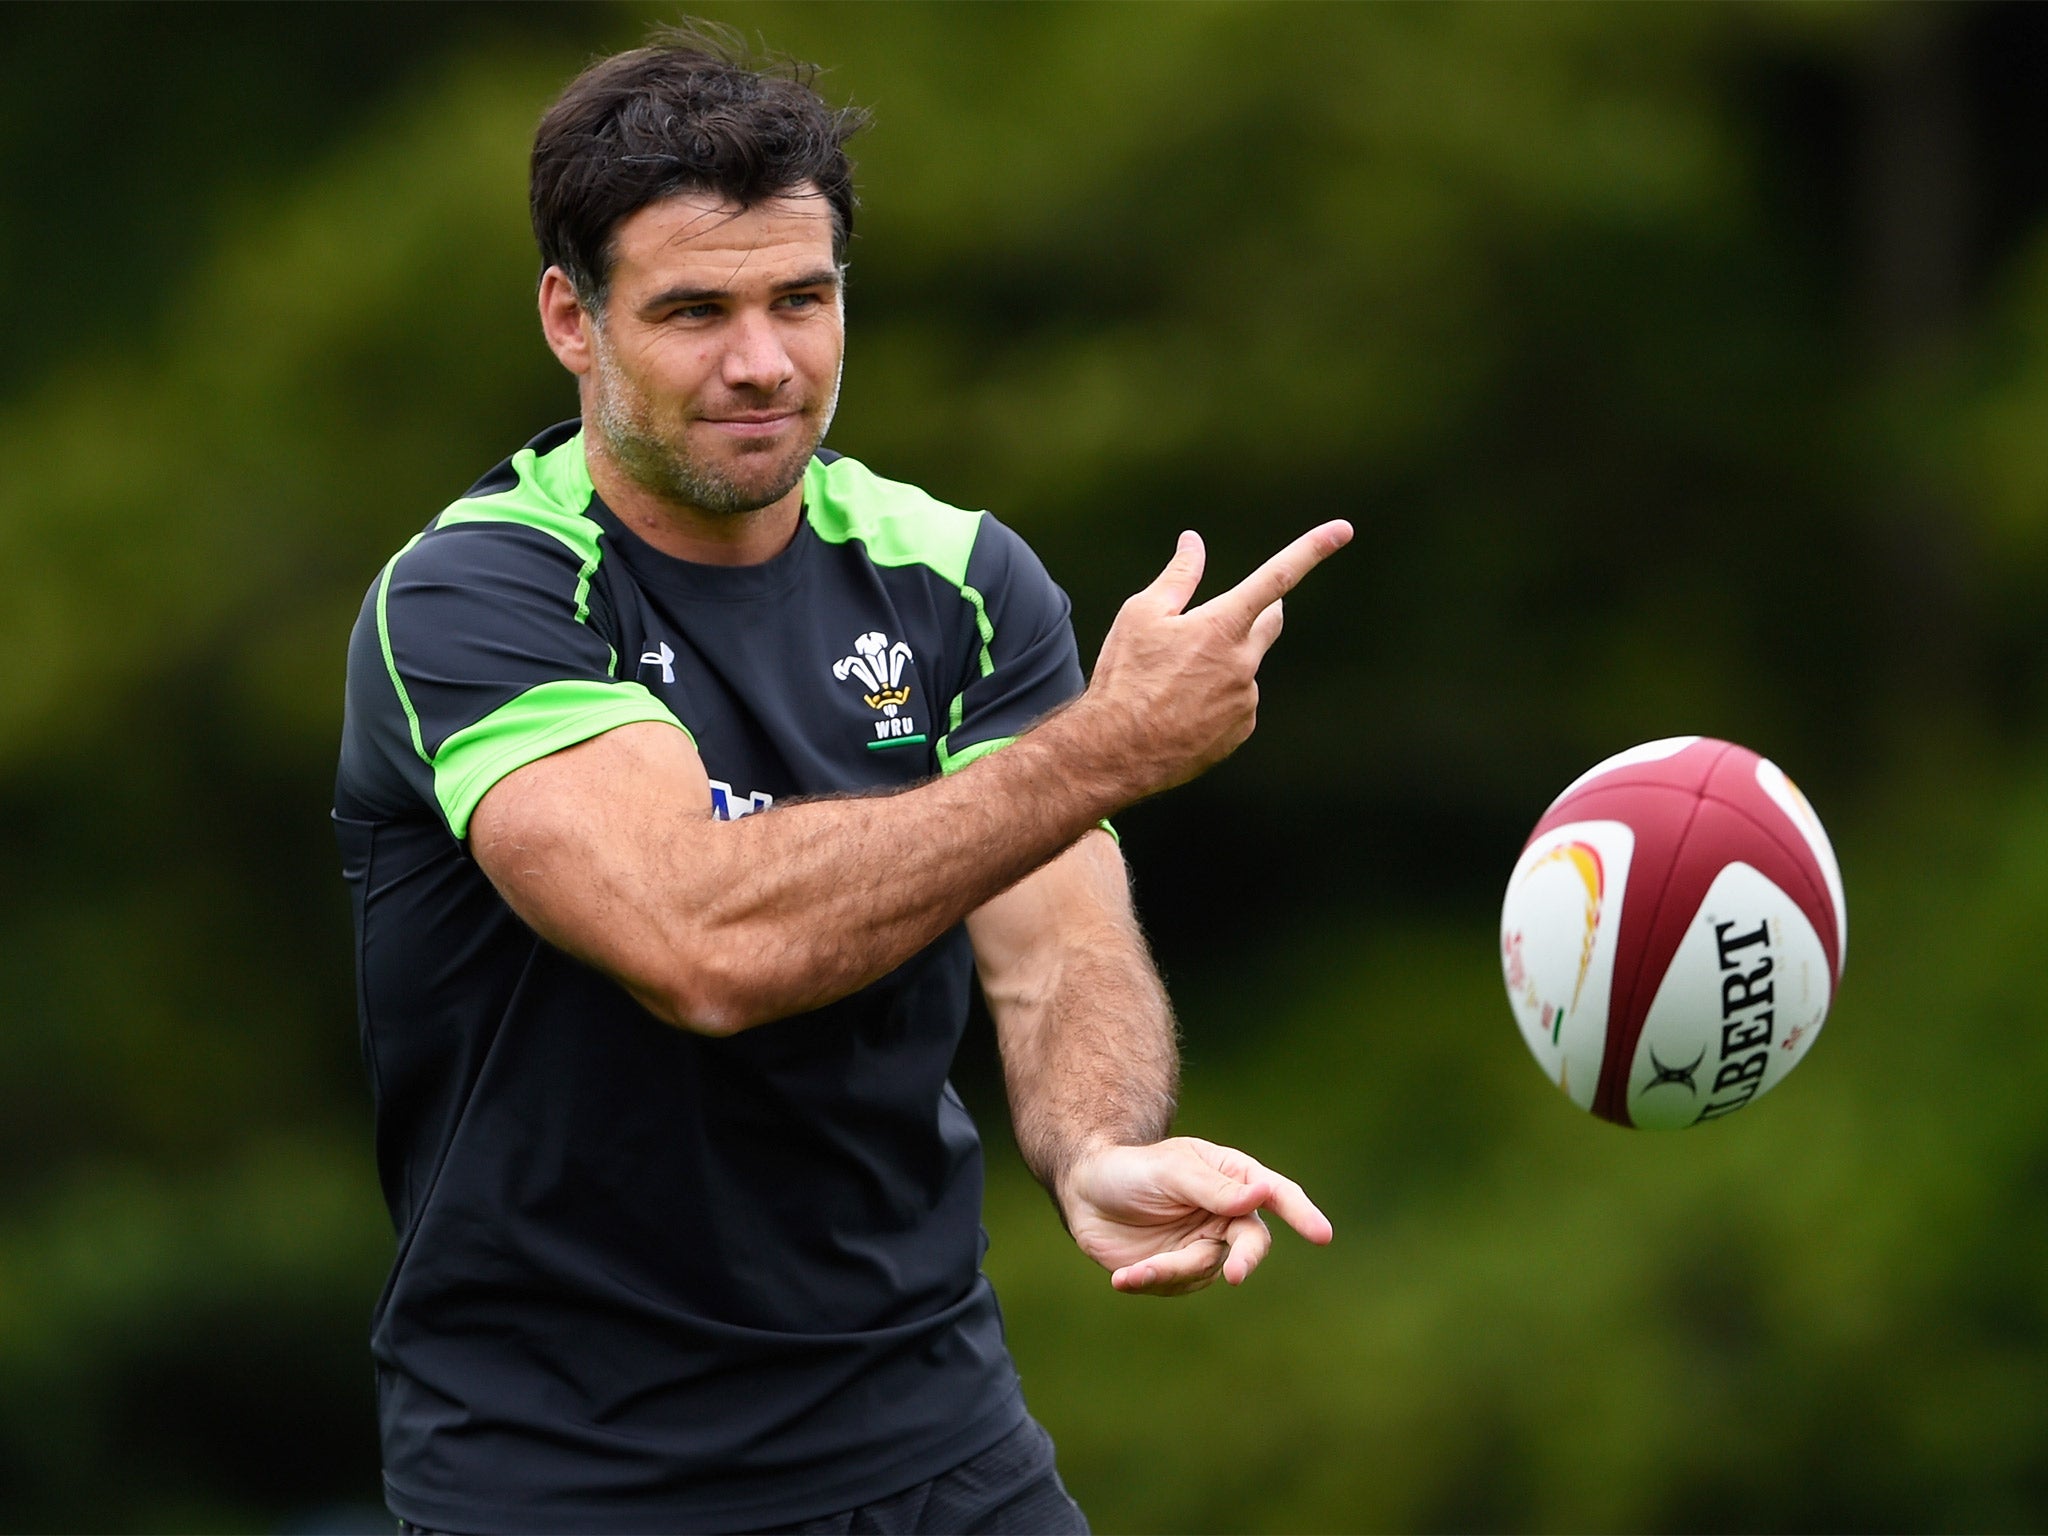 I caught up with Mike Phillips the other day and he has taken his World Cup omission well